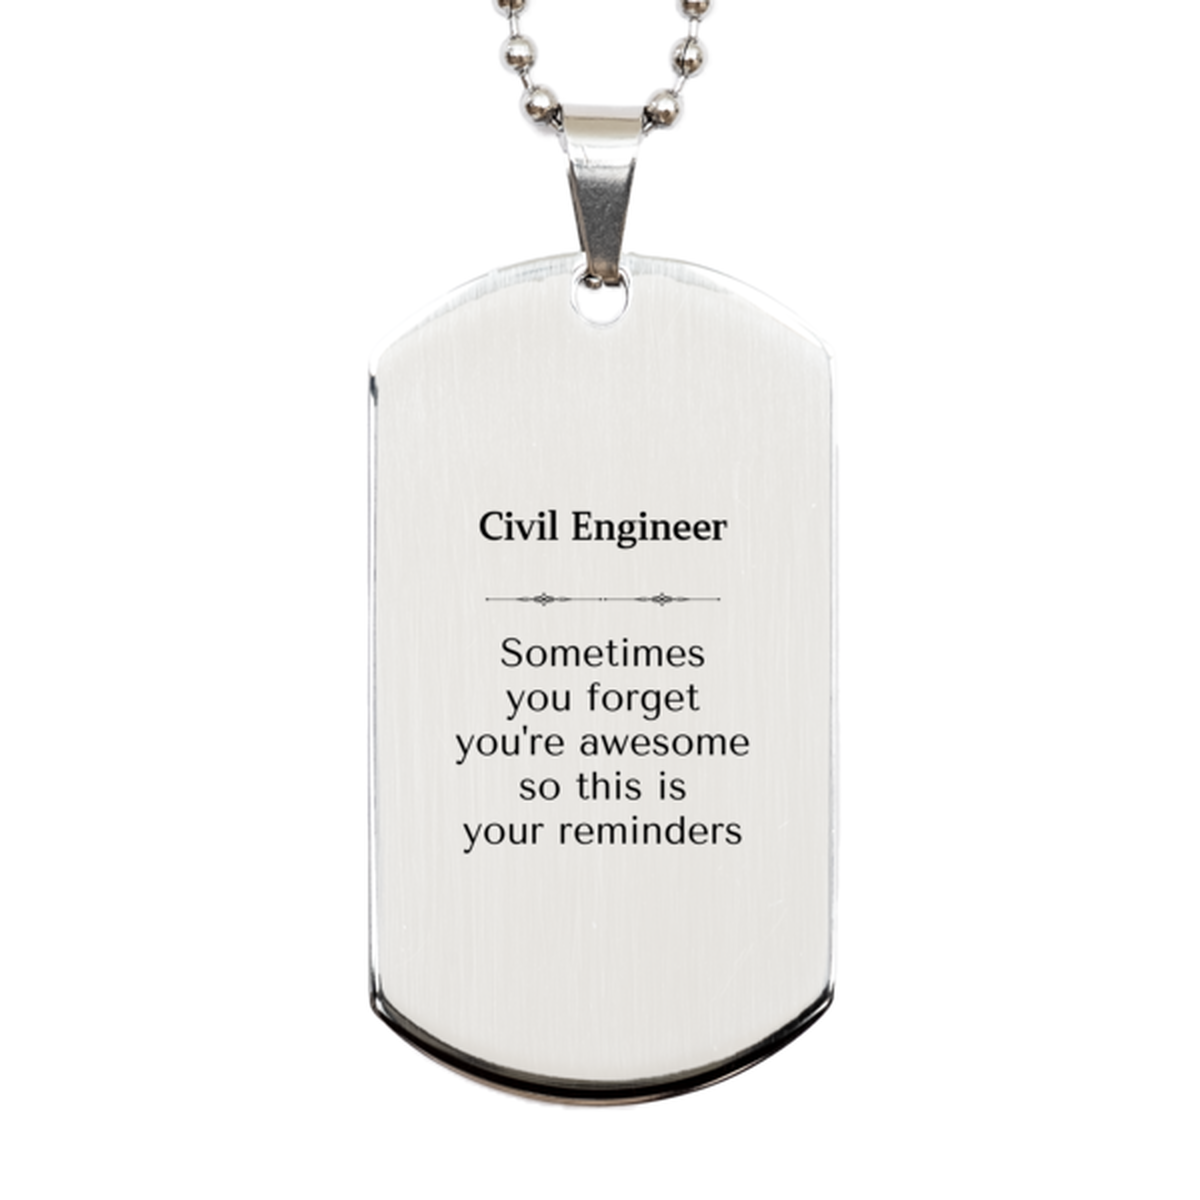 Sentimental Civil Engineer Silver Dog Tag, Civil Engineer Sometimes you forget you're awesome so this is your reminders, Graduation Christmas Birthday Gifts for Civil Engineer, Men, Women, Coworkers